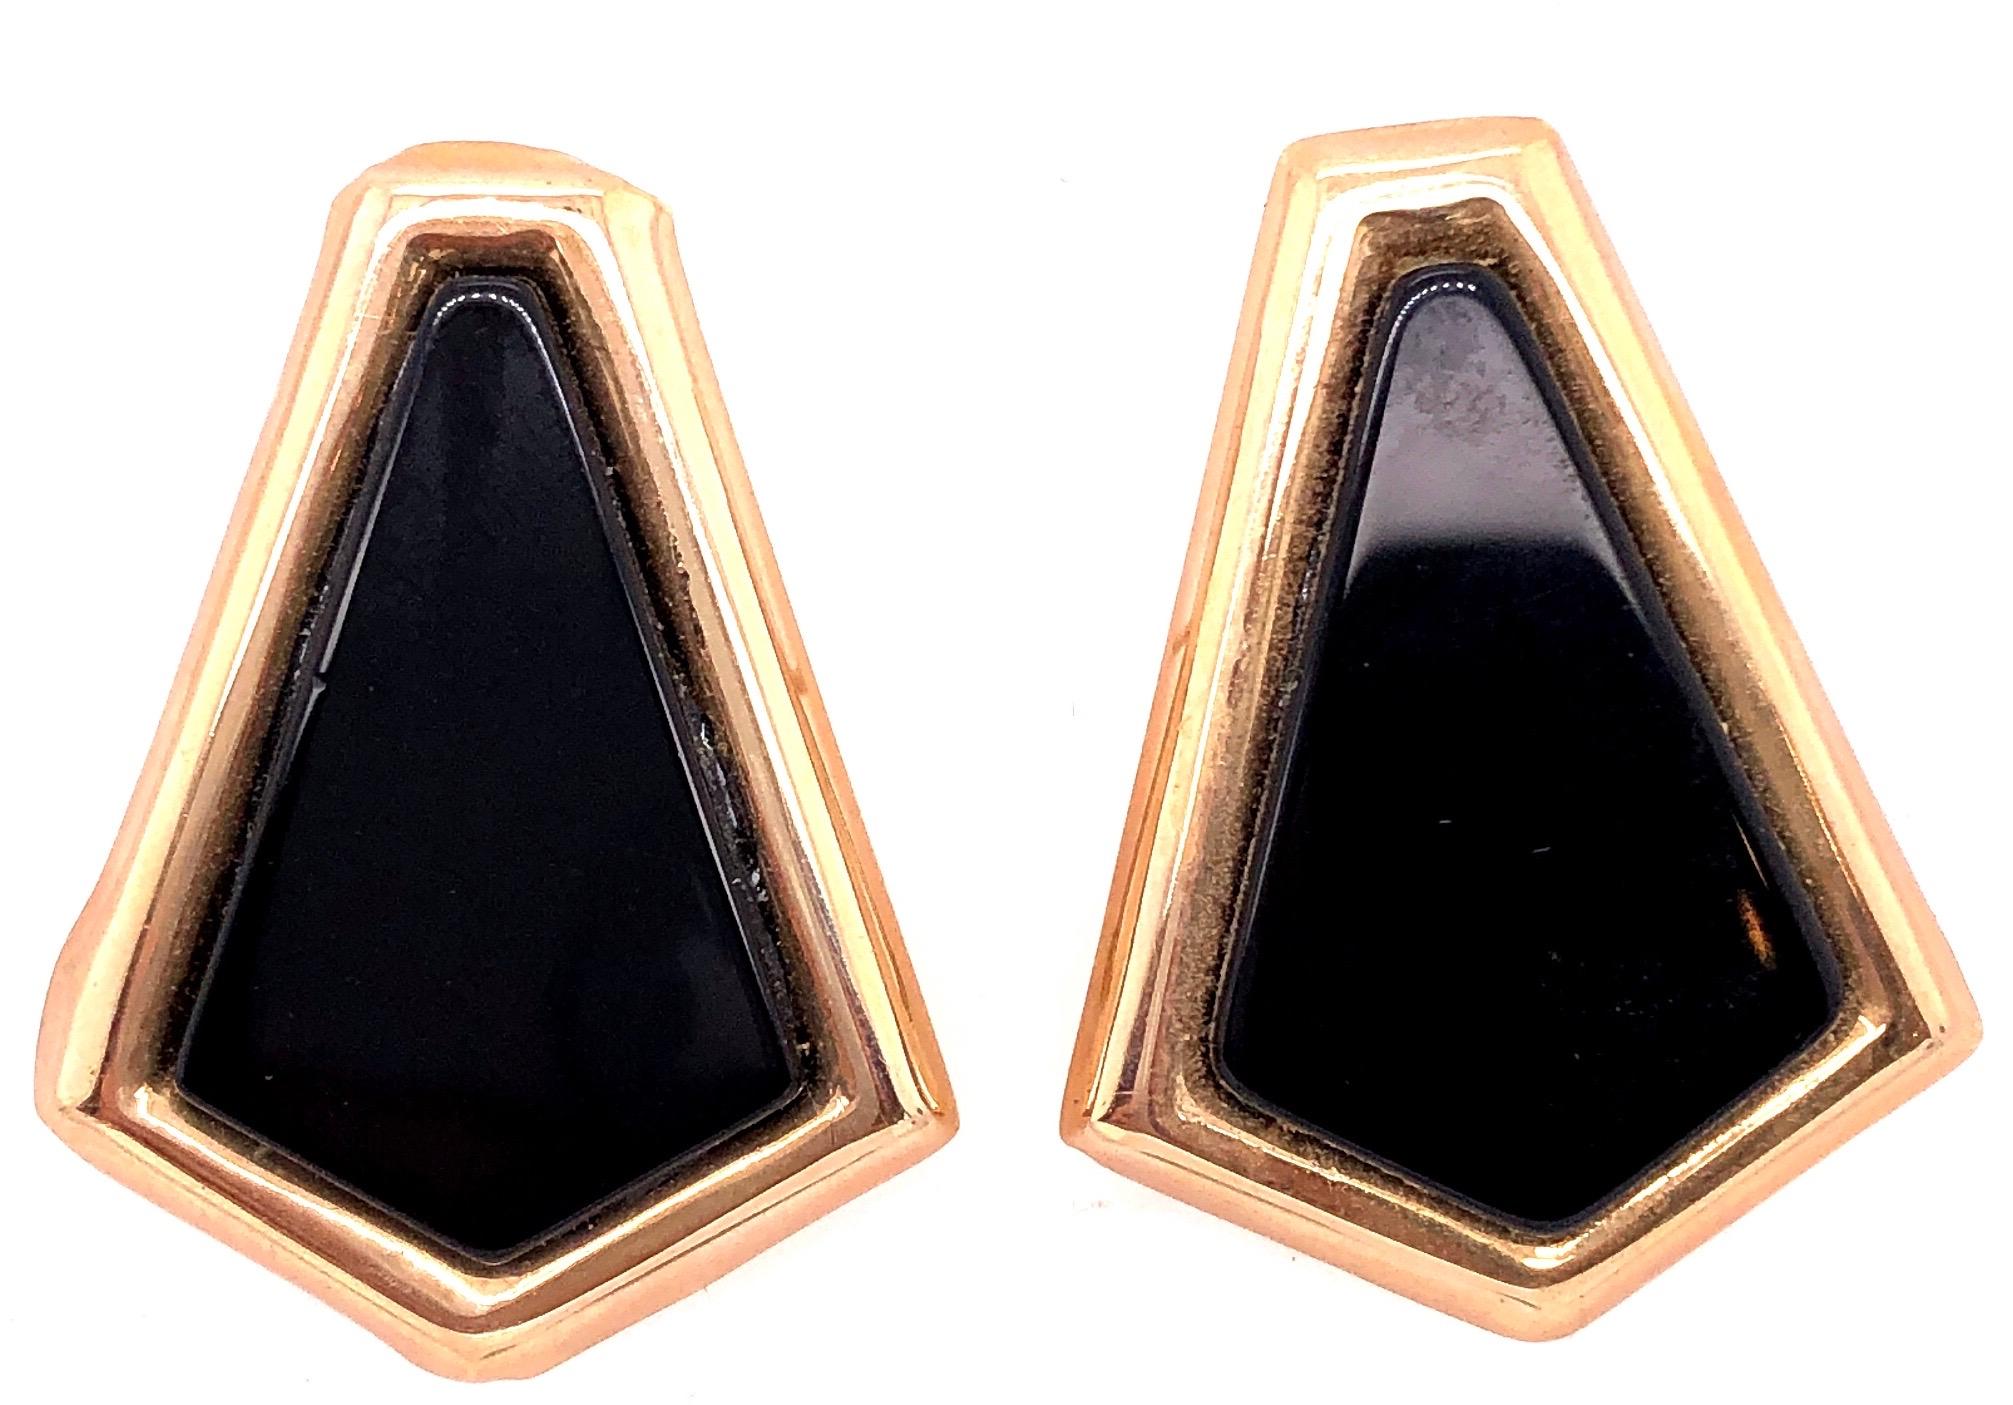 14 Karat Yellow Gold And Onyx Earrings Pentagon Shape With English Locks
7.22 grams total weight.
